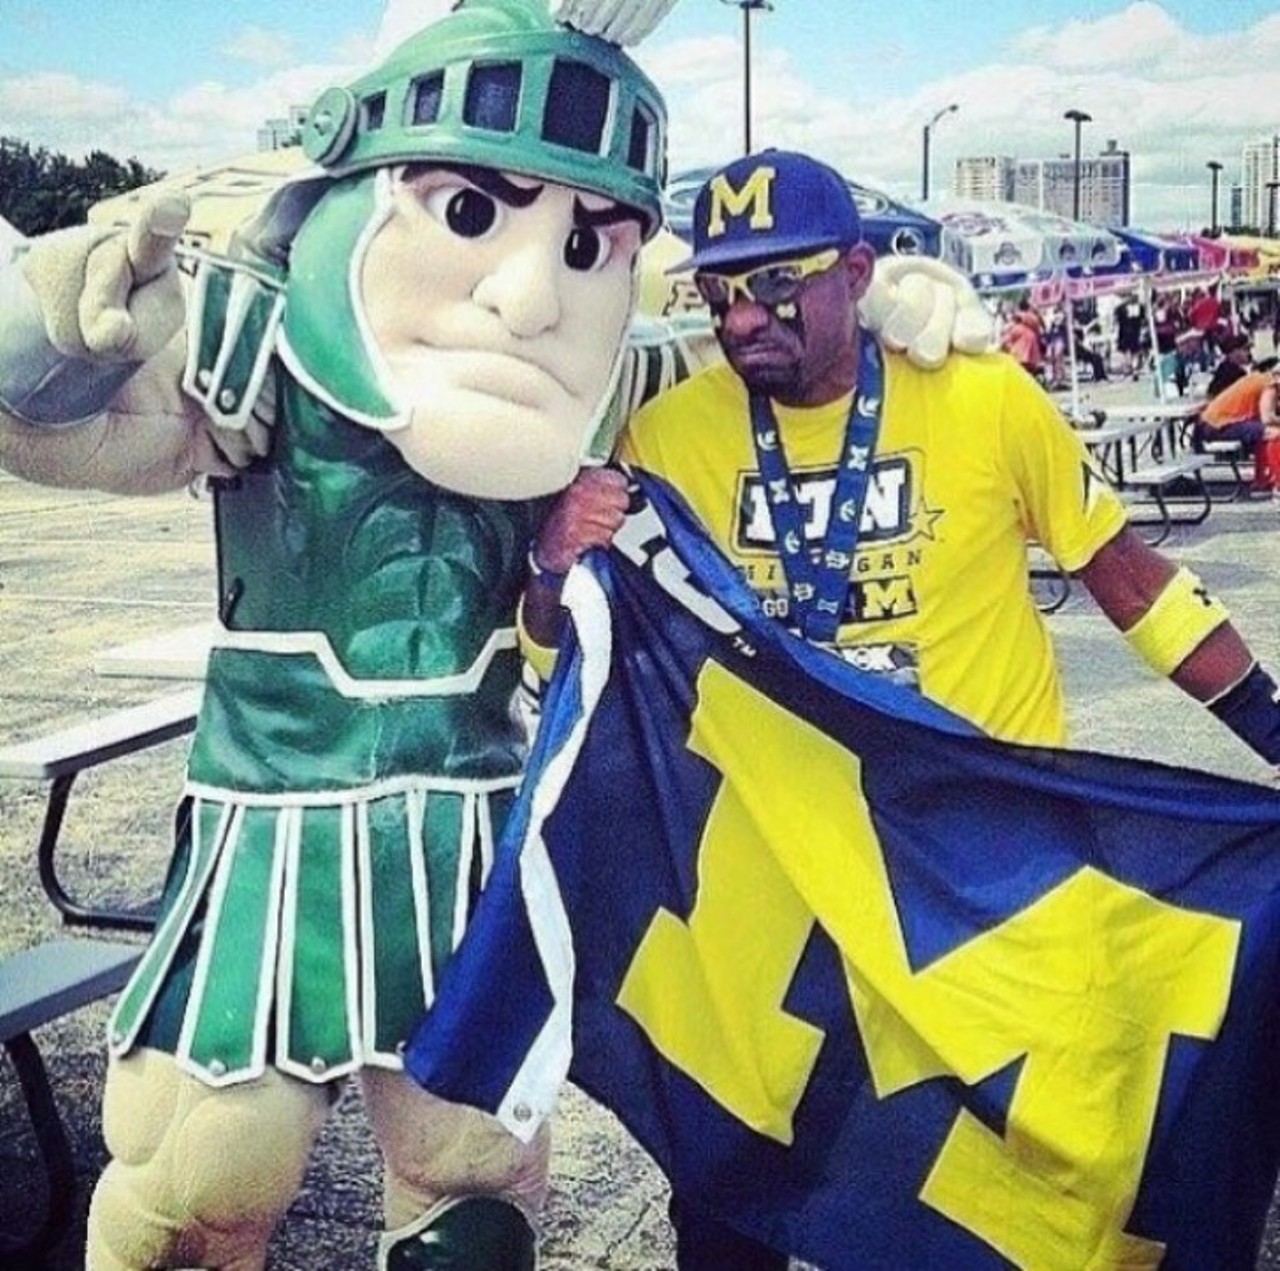 Weird, nobody here cares whether my alma mater is U of M or MSU?
Photo courtesy of @gblanc3